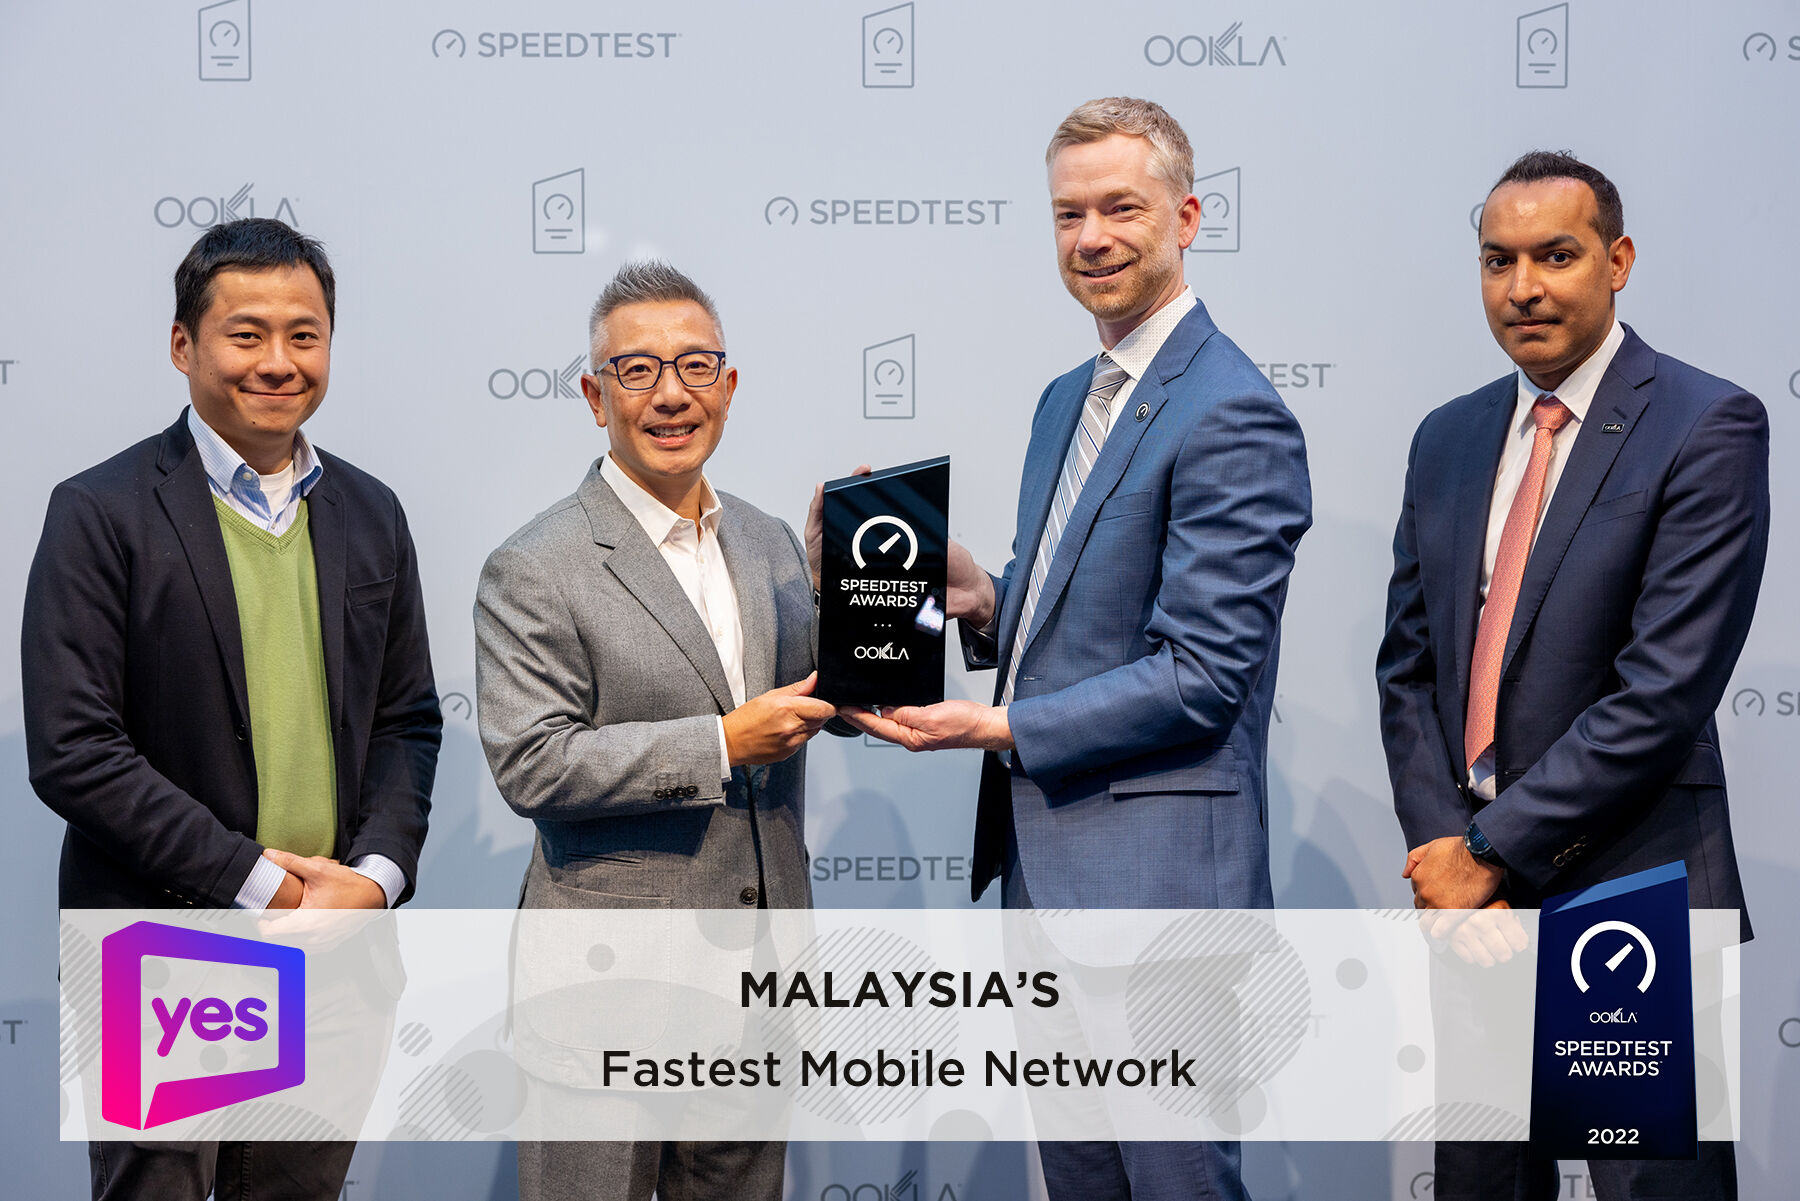 Yes 5G Crowned Ookla Speedtest Awards As Malaysia's Fastest Mobile Network 24